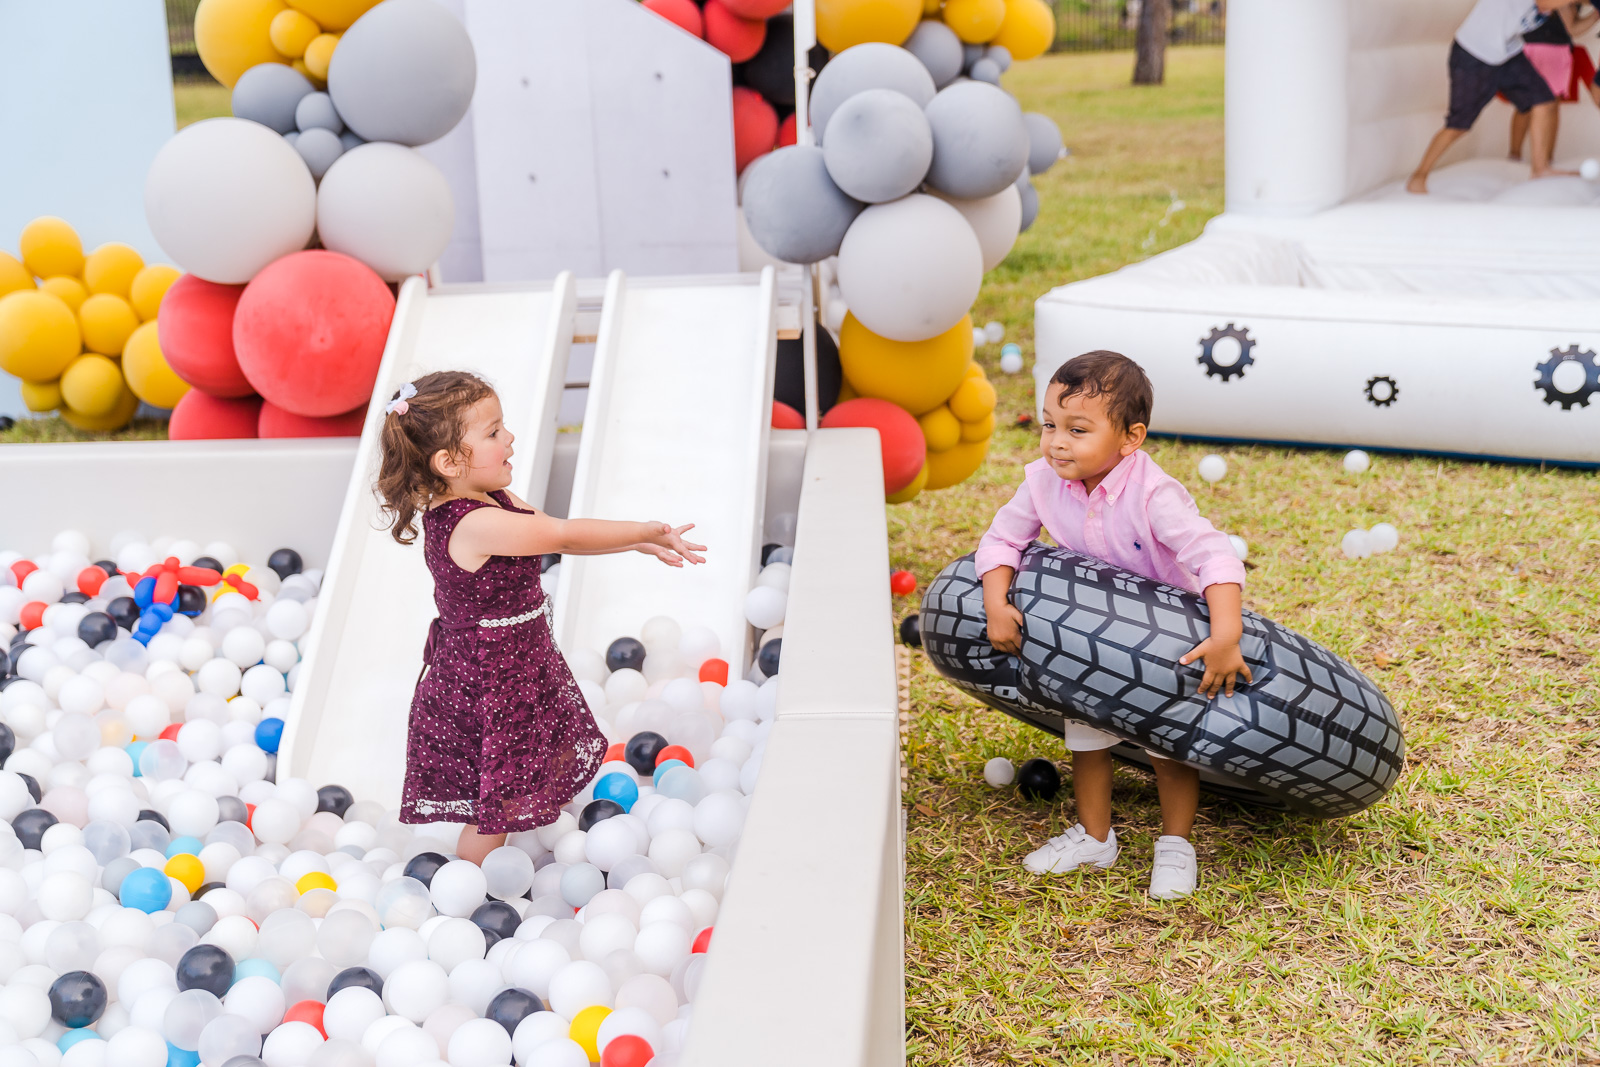 Orlando event photography and videography of luxury kids birthday party